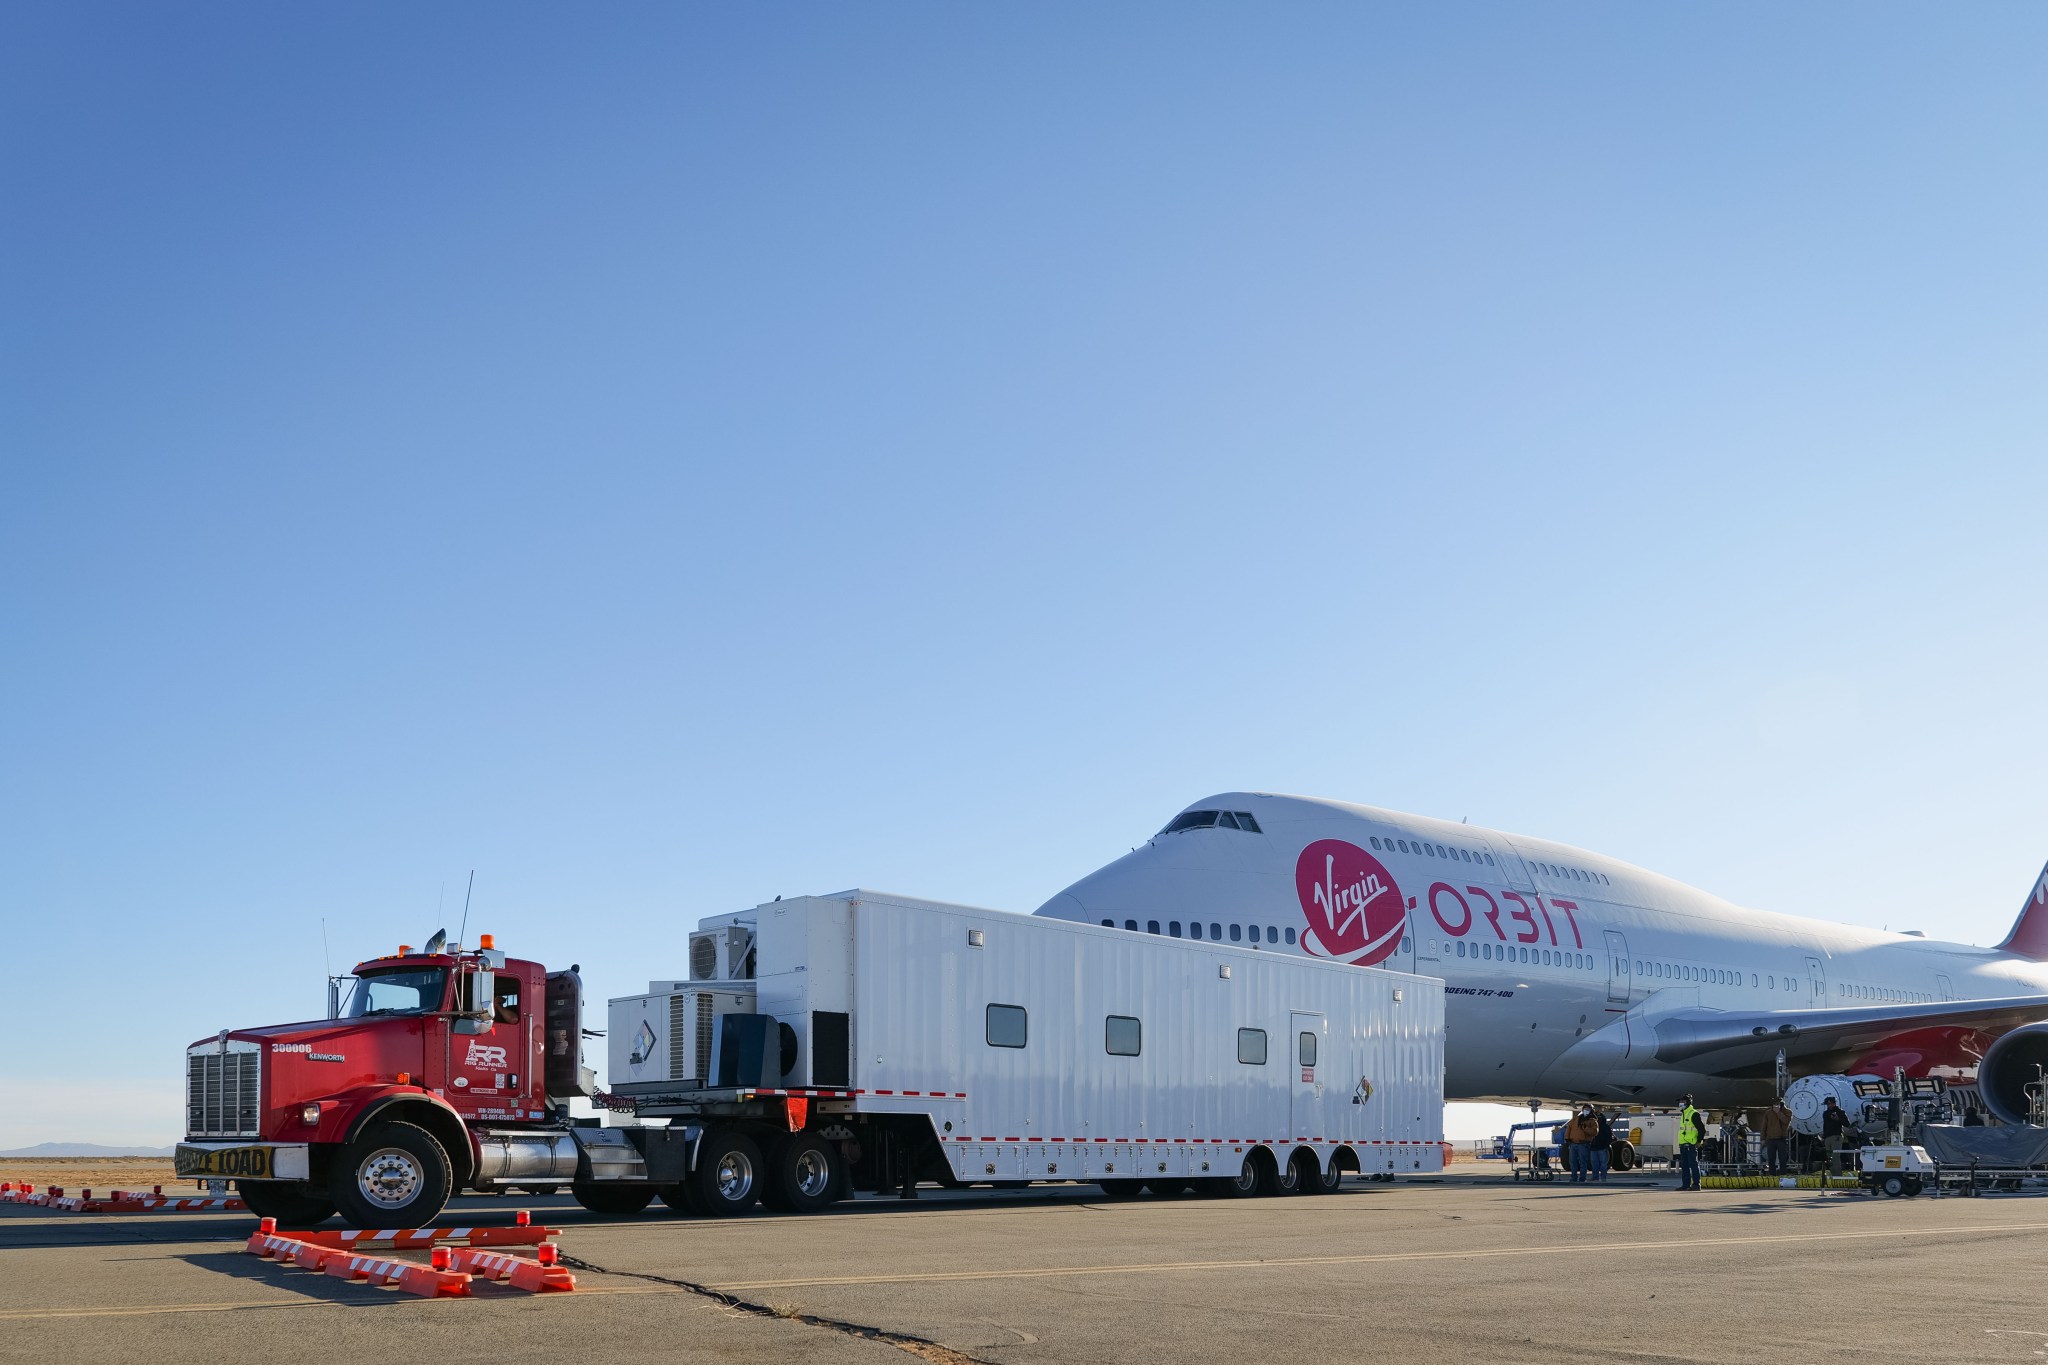 Virgin Orbit's payload trailer, carrying several NASA-sponsored small satellites, arrives at the Mojave Air and Space Port.